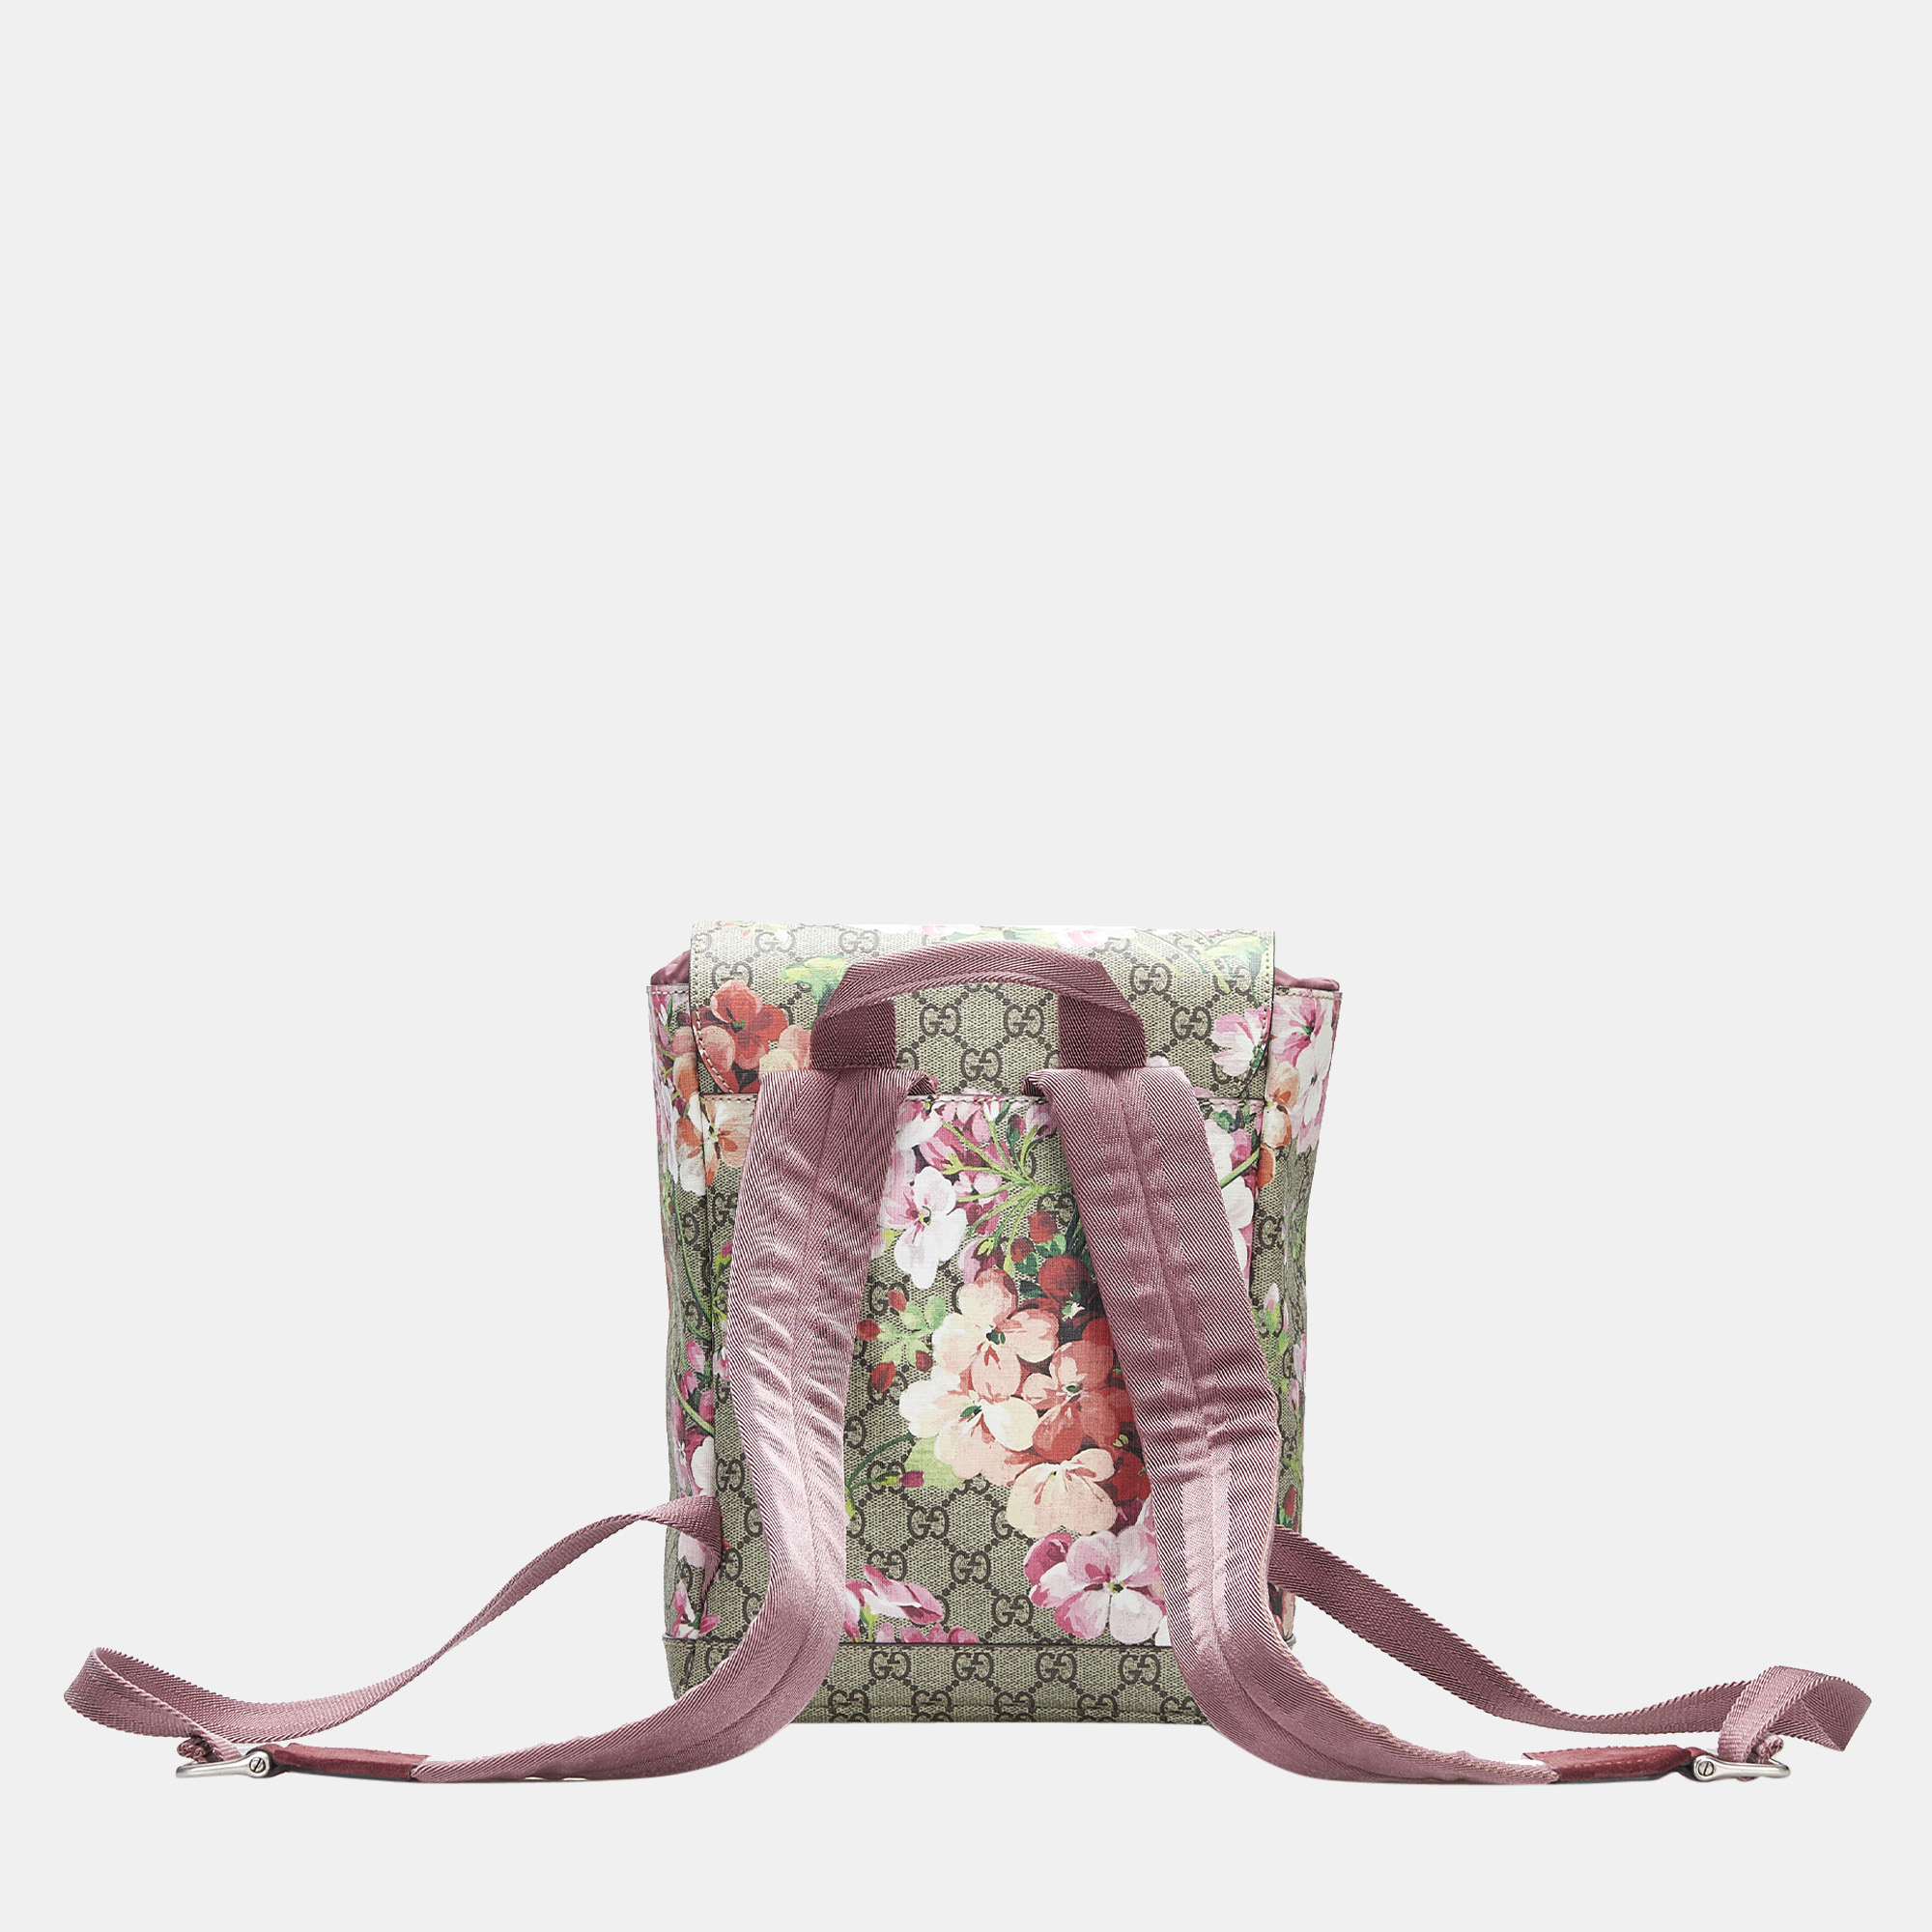 Gucci Beige/Brown GG Supreme Blooms Backpack